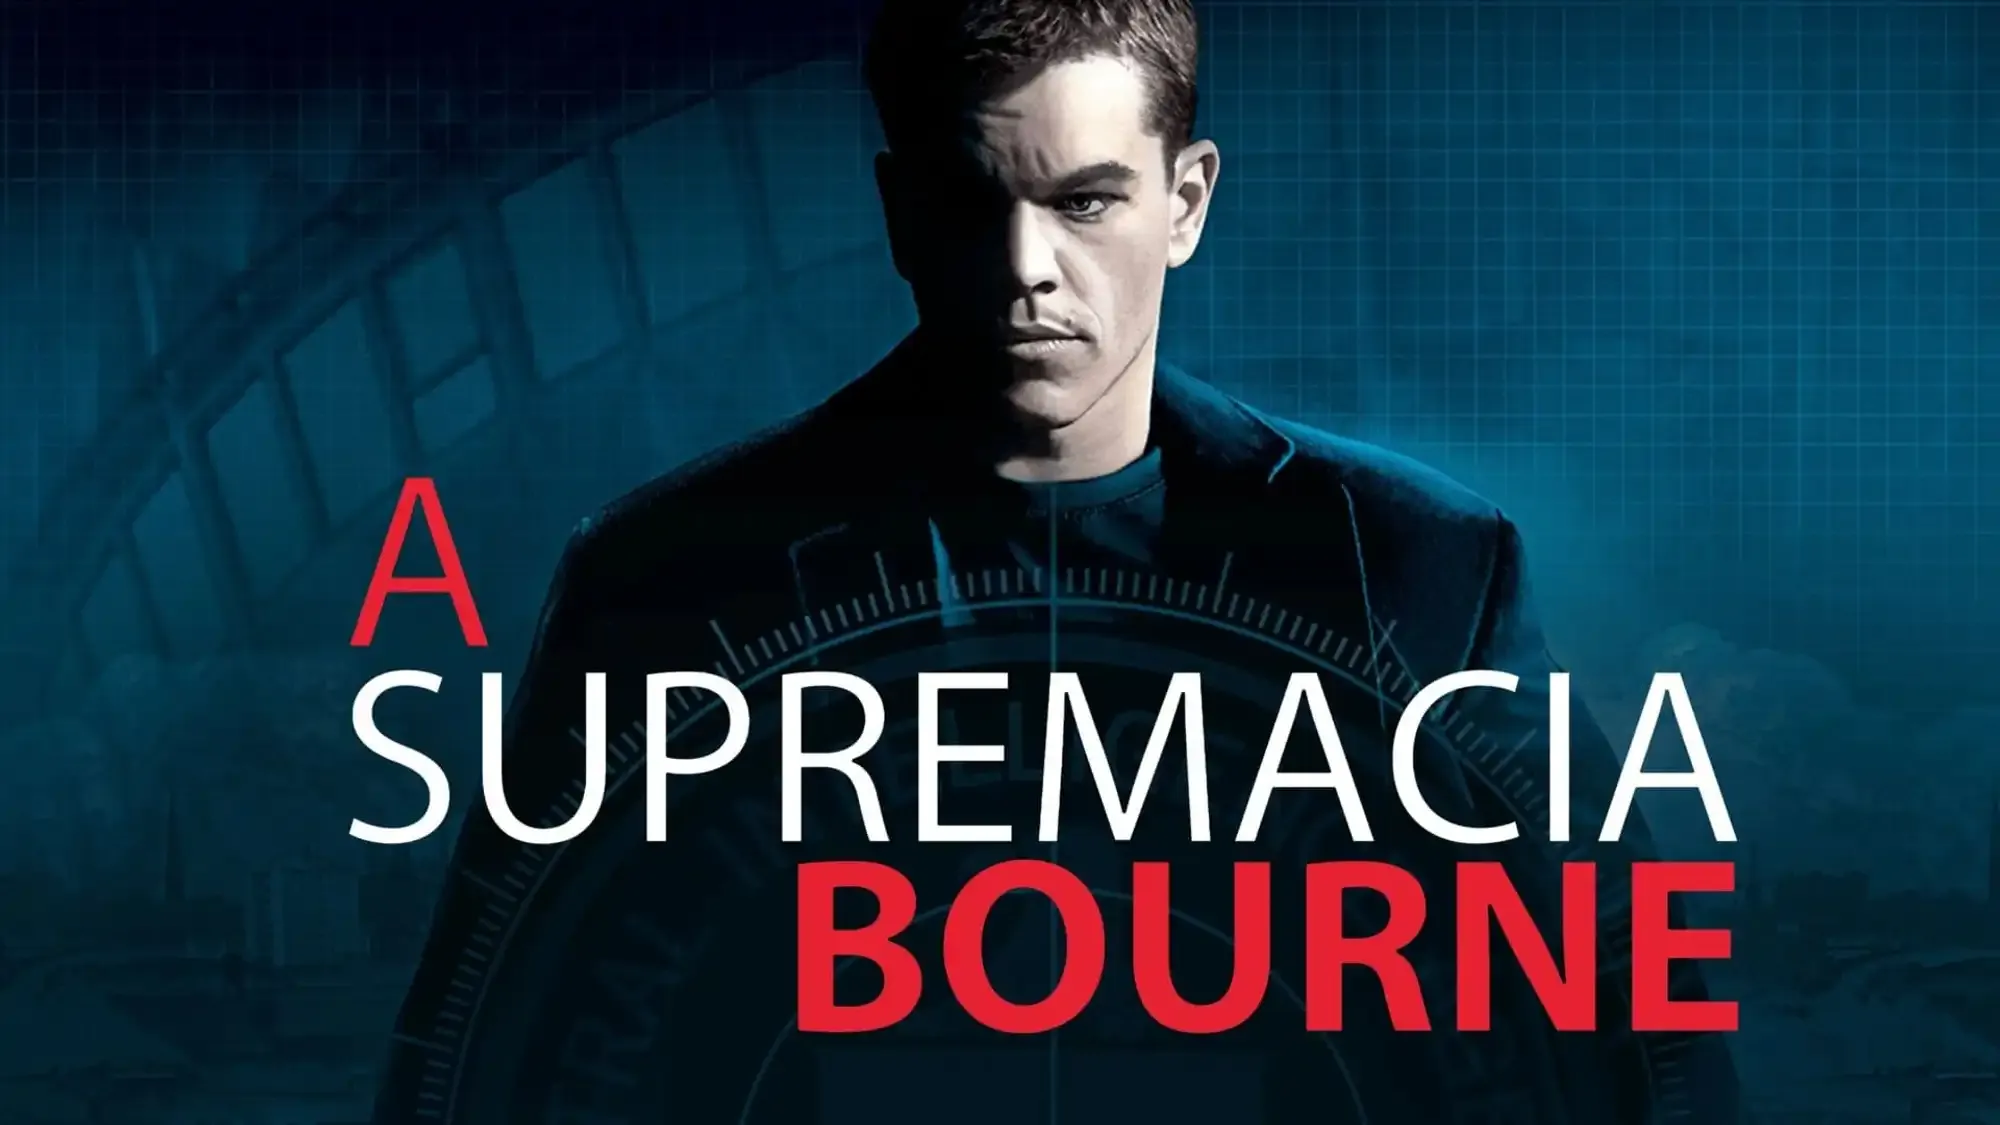 The Bourne Supremacy movie review